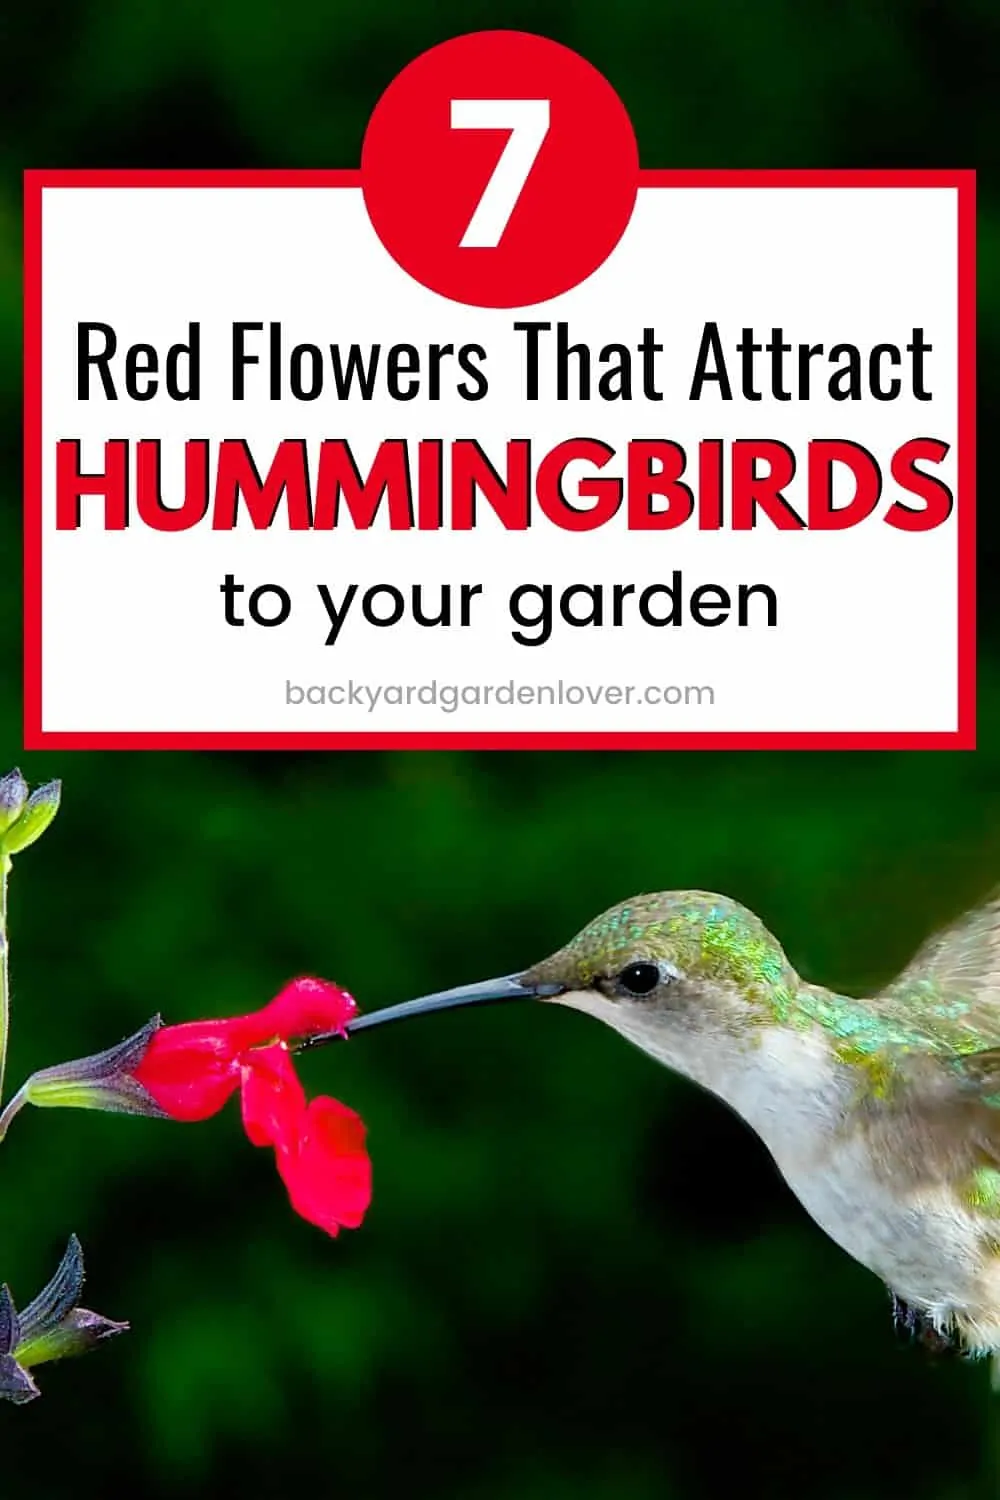 Red flowers that attract hummingbirds to your garden